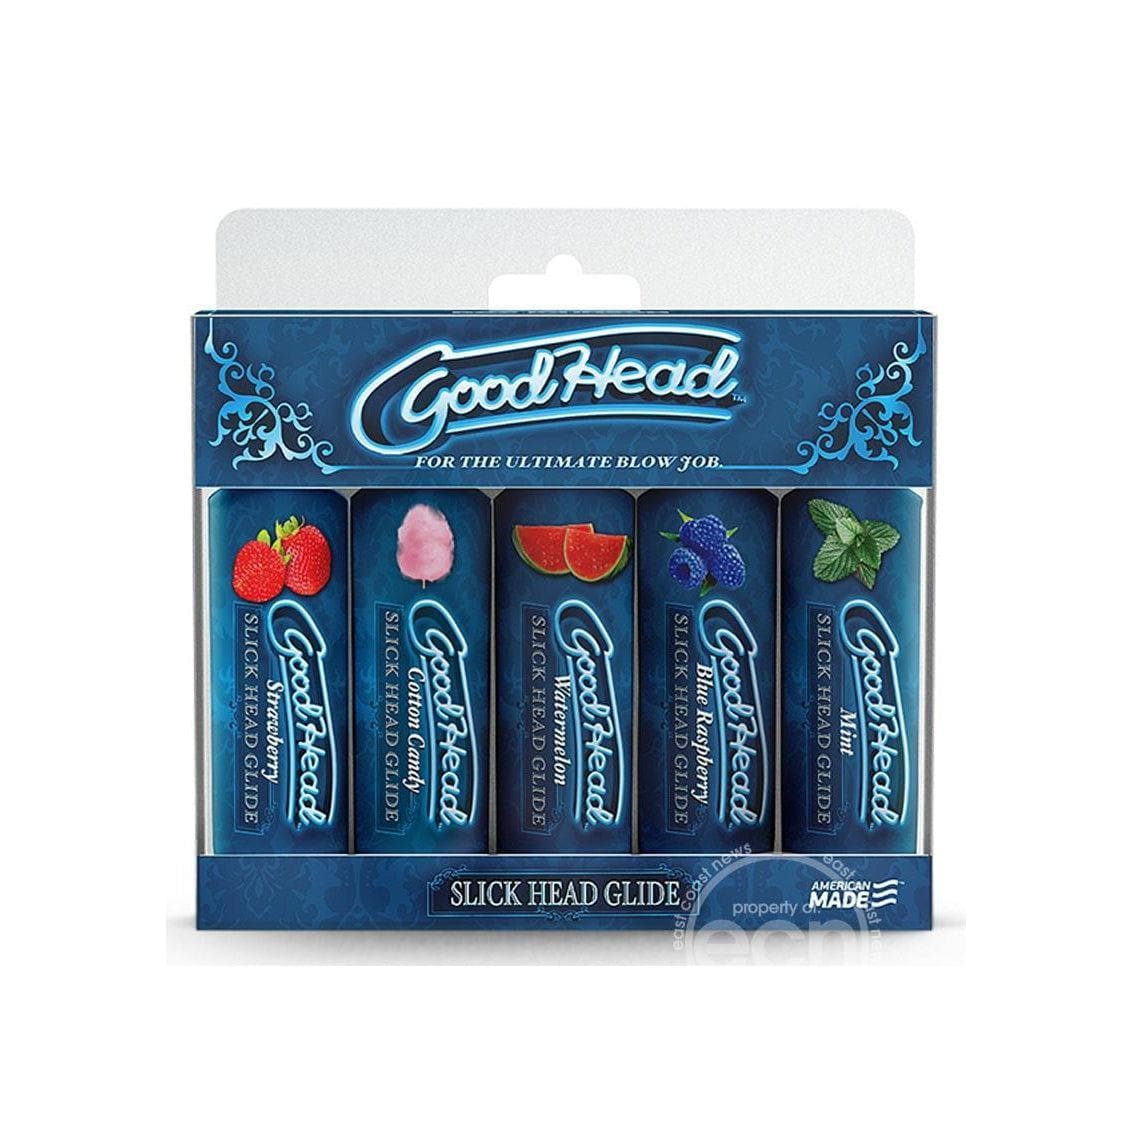 GoodHead Slick Head Glide Water Based Flavored Lubricants 5pc Set Assorted Flavors - Romantic Blessings